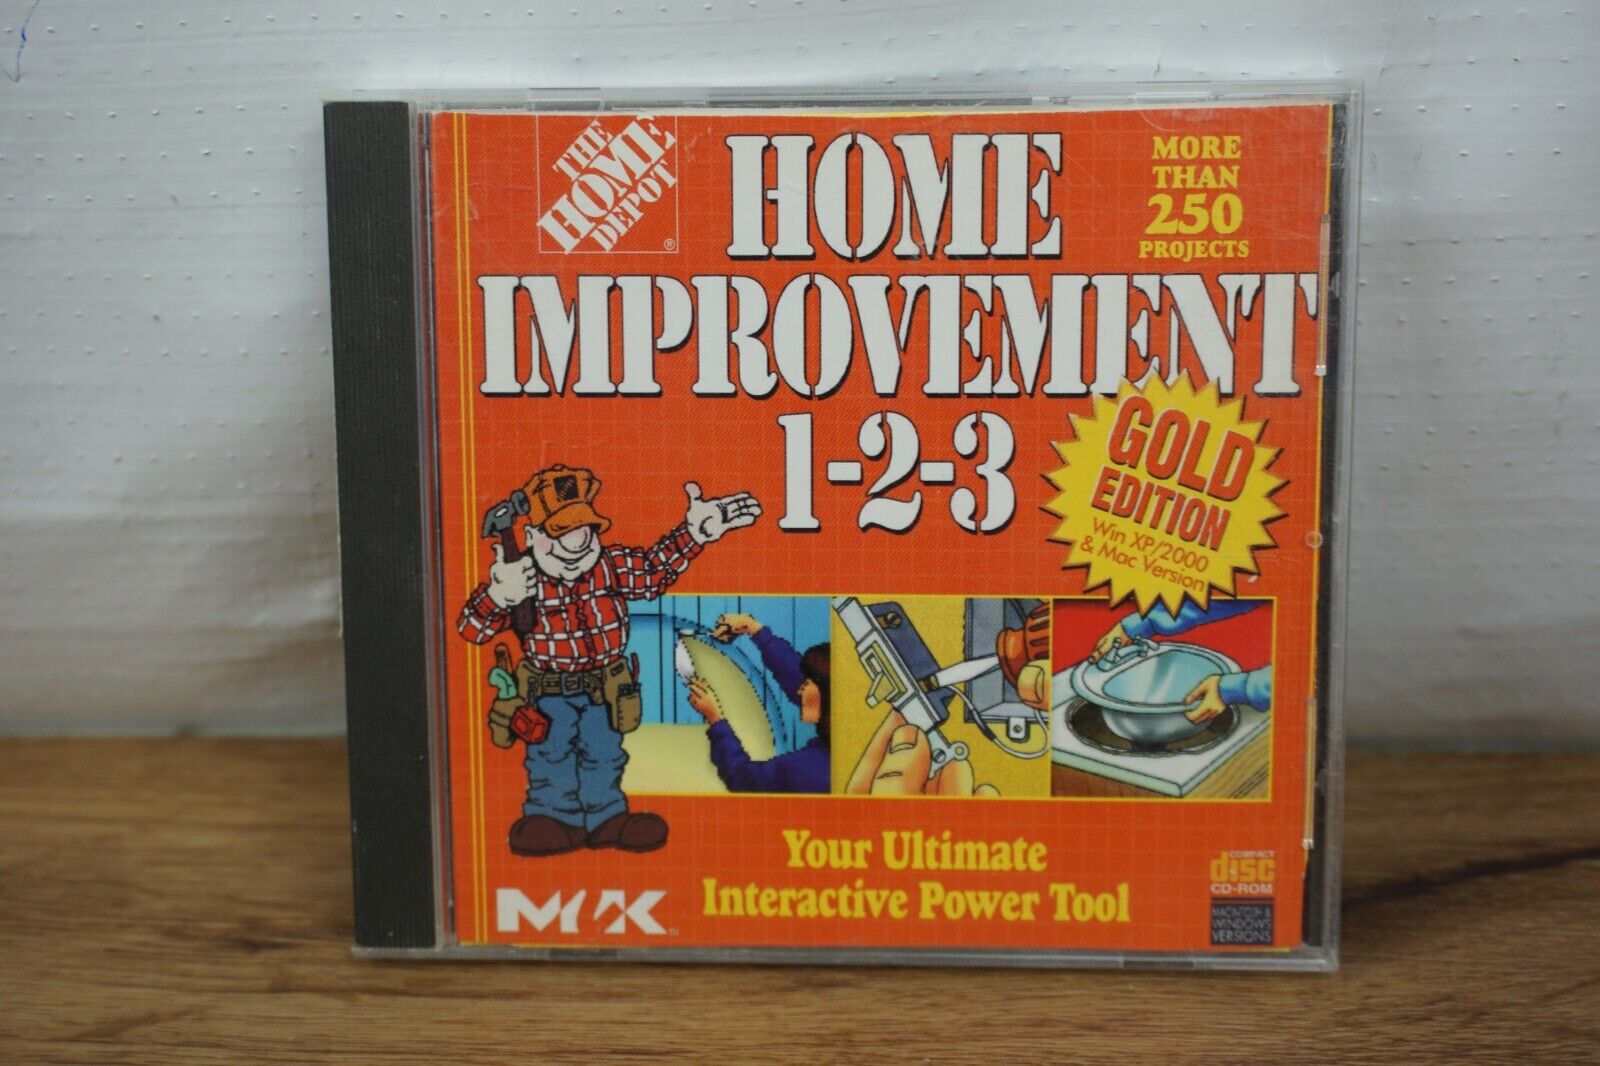 home improvement 1 2 3 gold edition PC CD-ROM - more than 250 projects